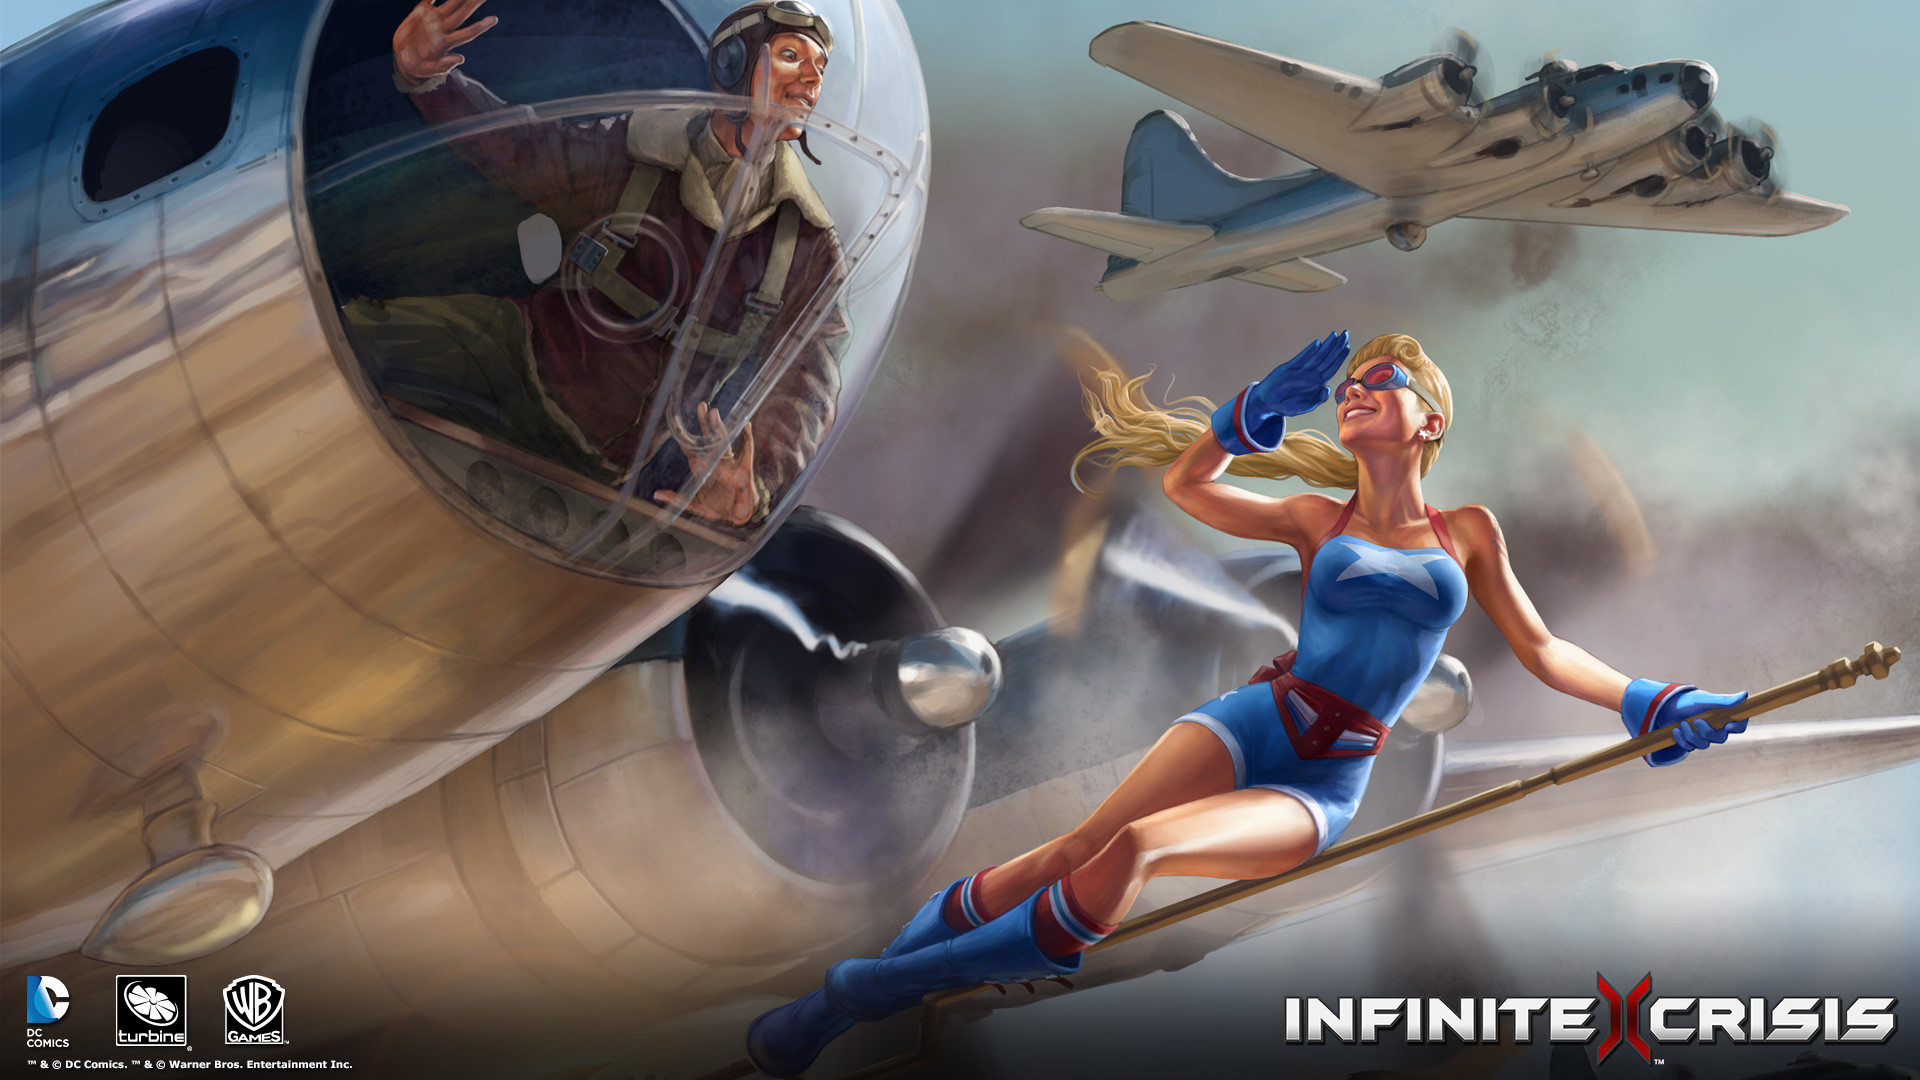 This amazing Bombshell Stargirl wallpaper is available now from the Infinite Crisis team